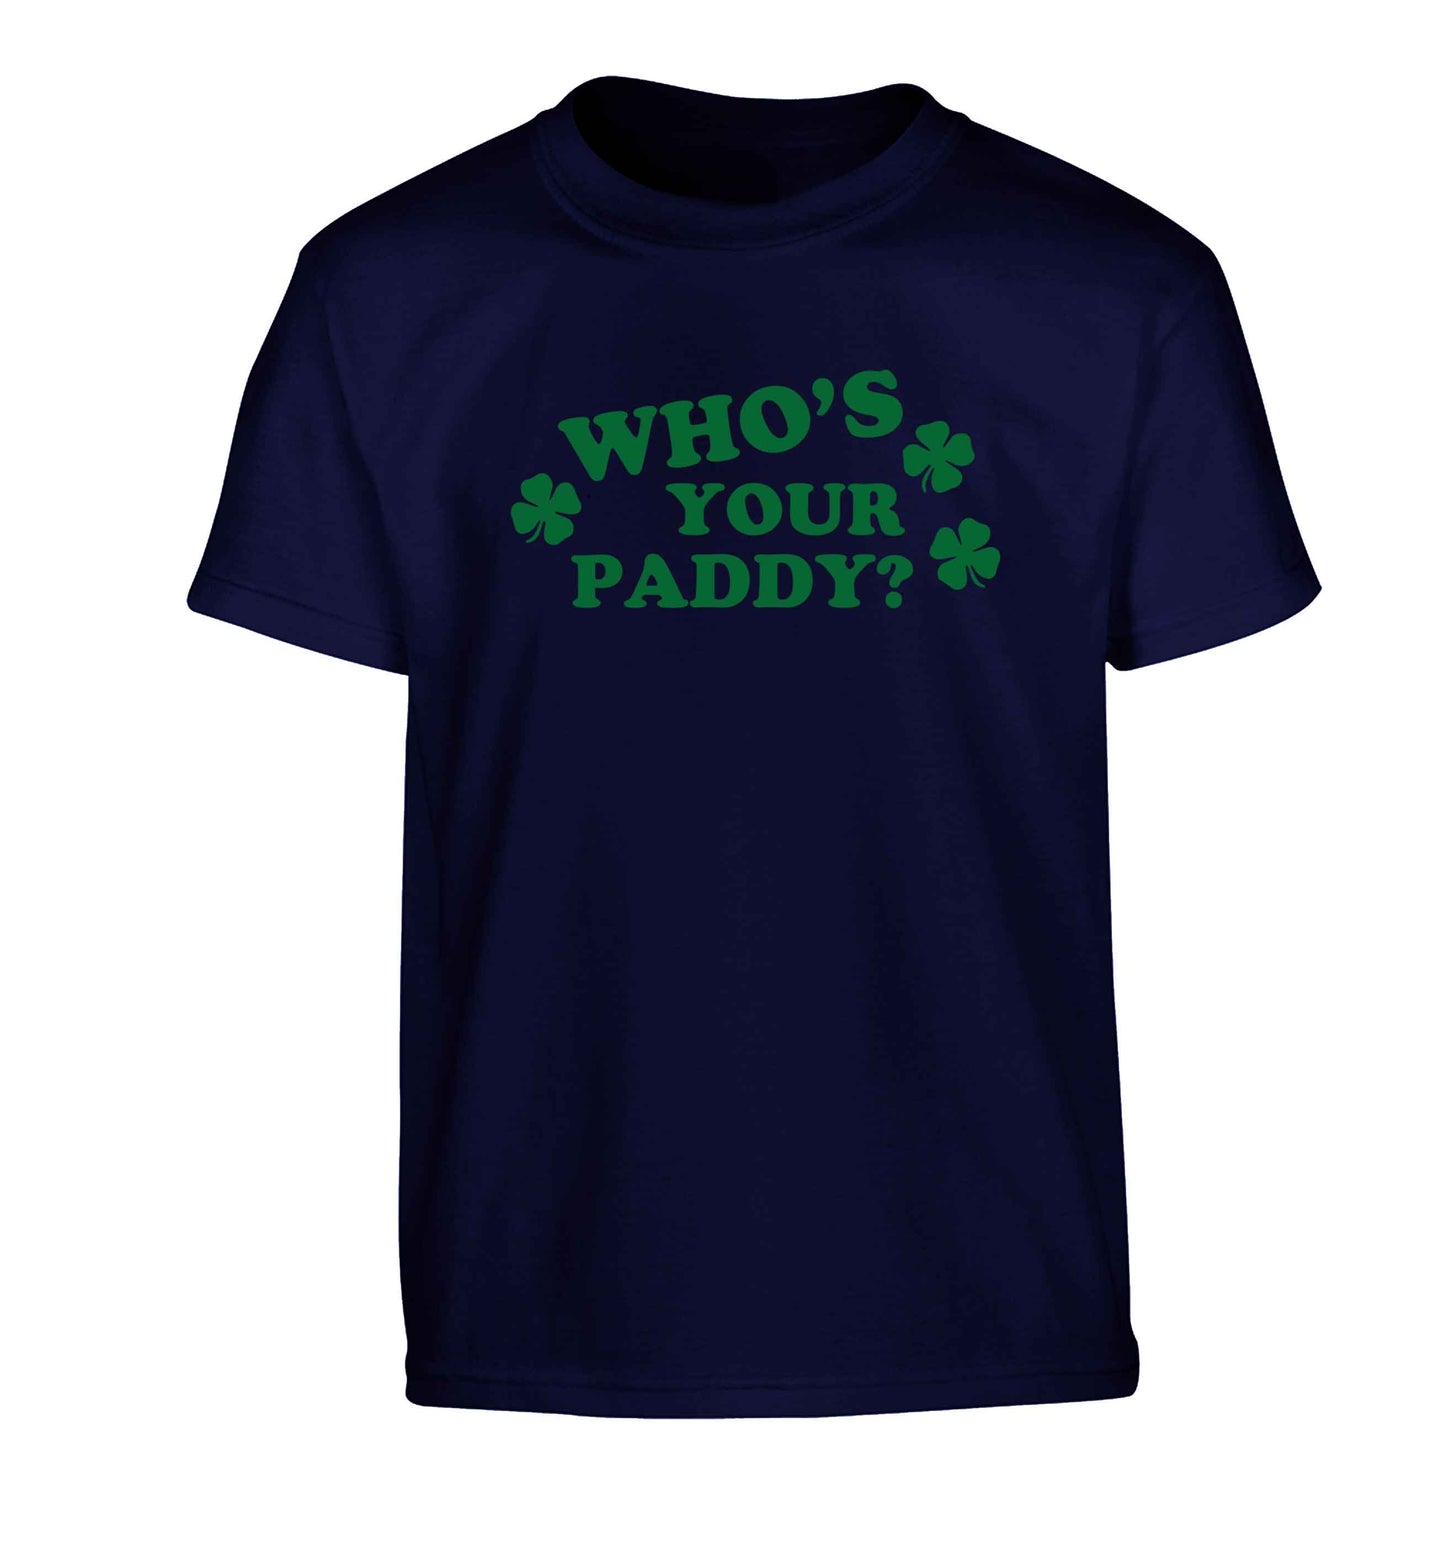 Who's your paddy? Children's navy Tshirt 12-13 Years